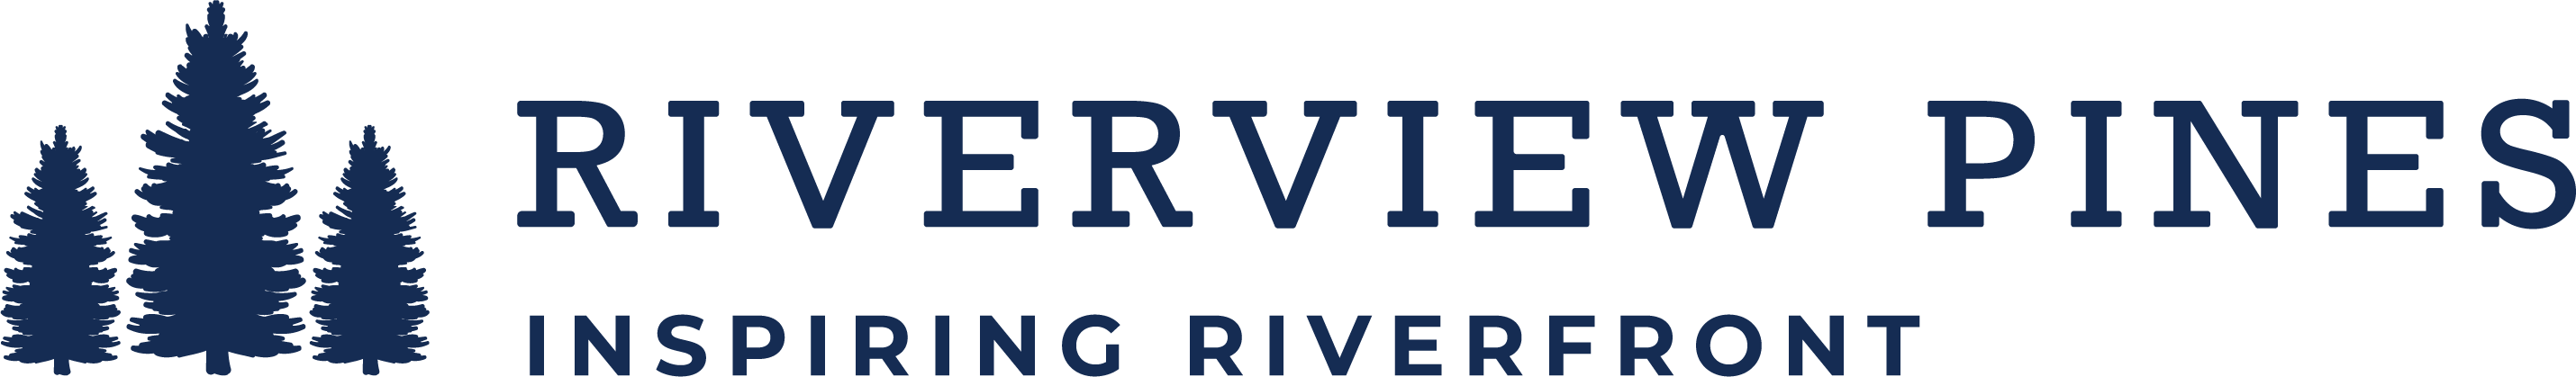 Riverview Pines